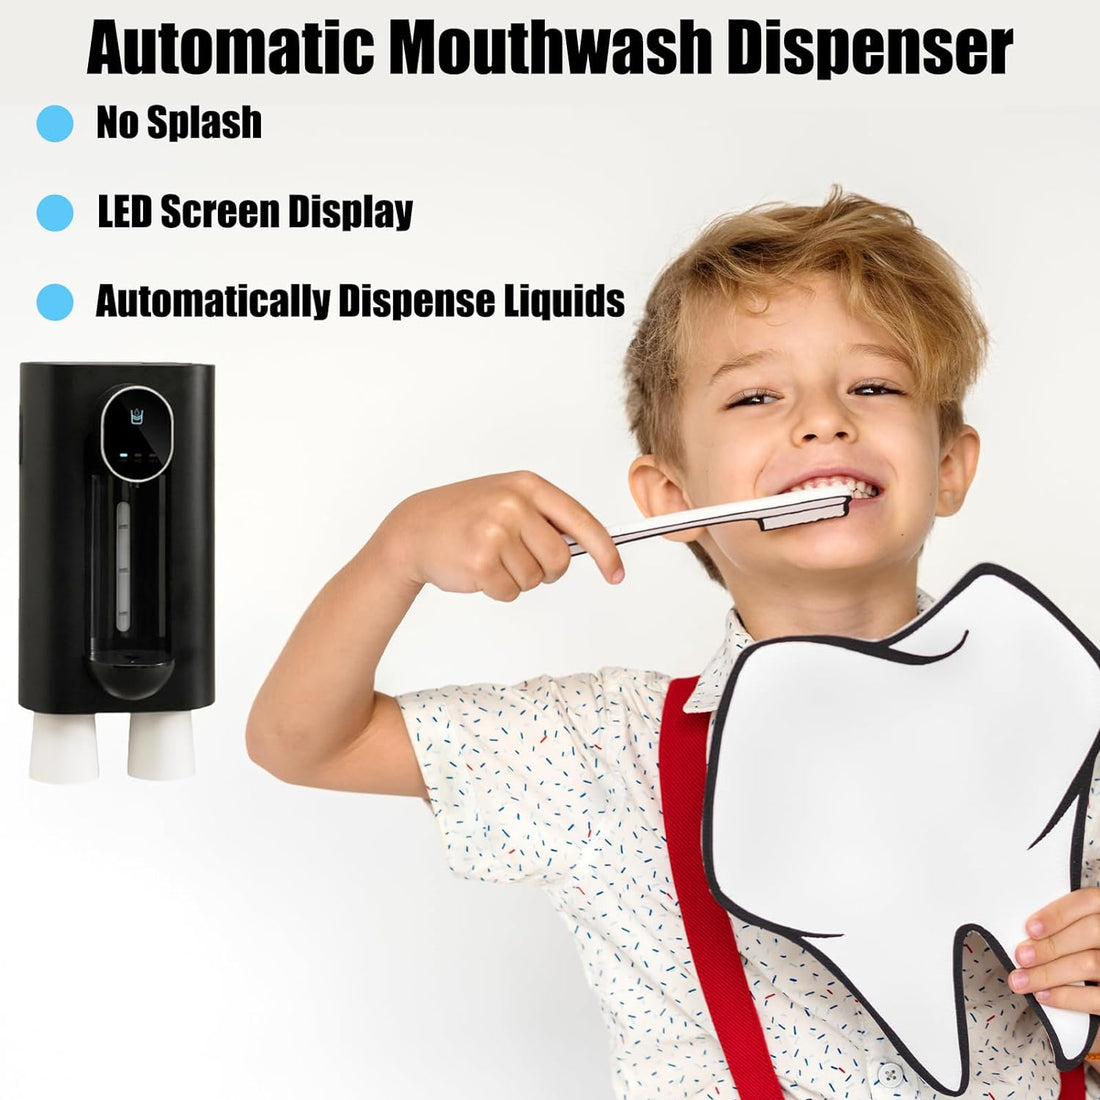 Meideli Automatic Mouthwash Dispenser for Bathroom, 540ml(18 oz) Wall Mounted Mouth Wash Dispenser, Refillable Mouthwash Container with 2 Magnetic Reusable Cups, 3 Mode Liquid Volume Adjustable White